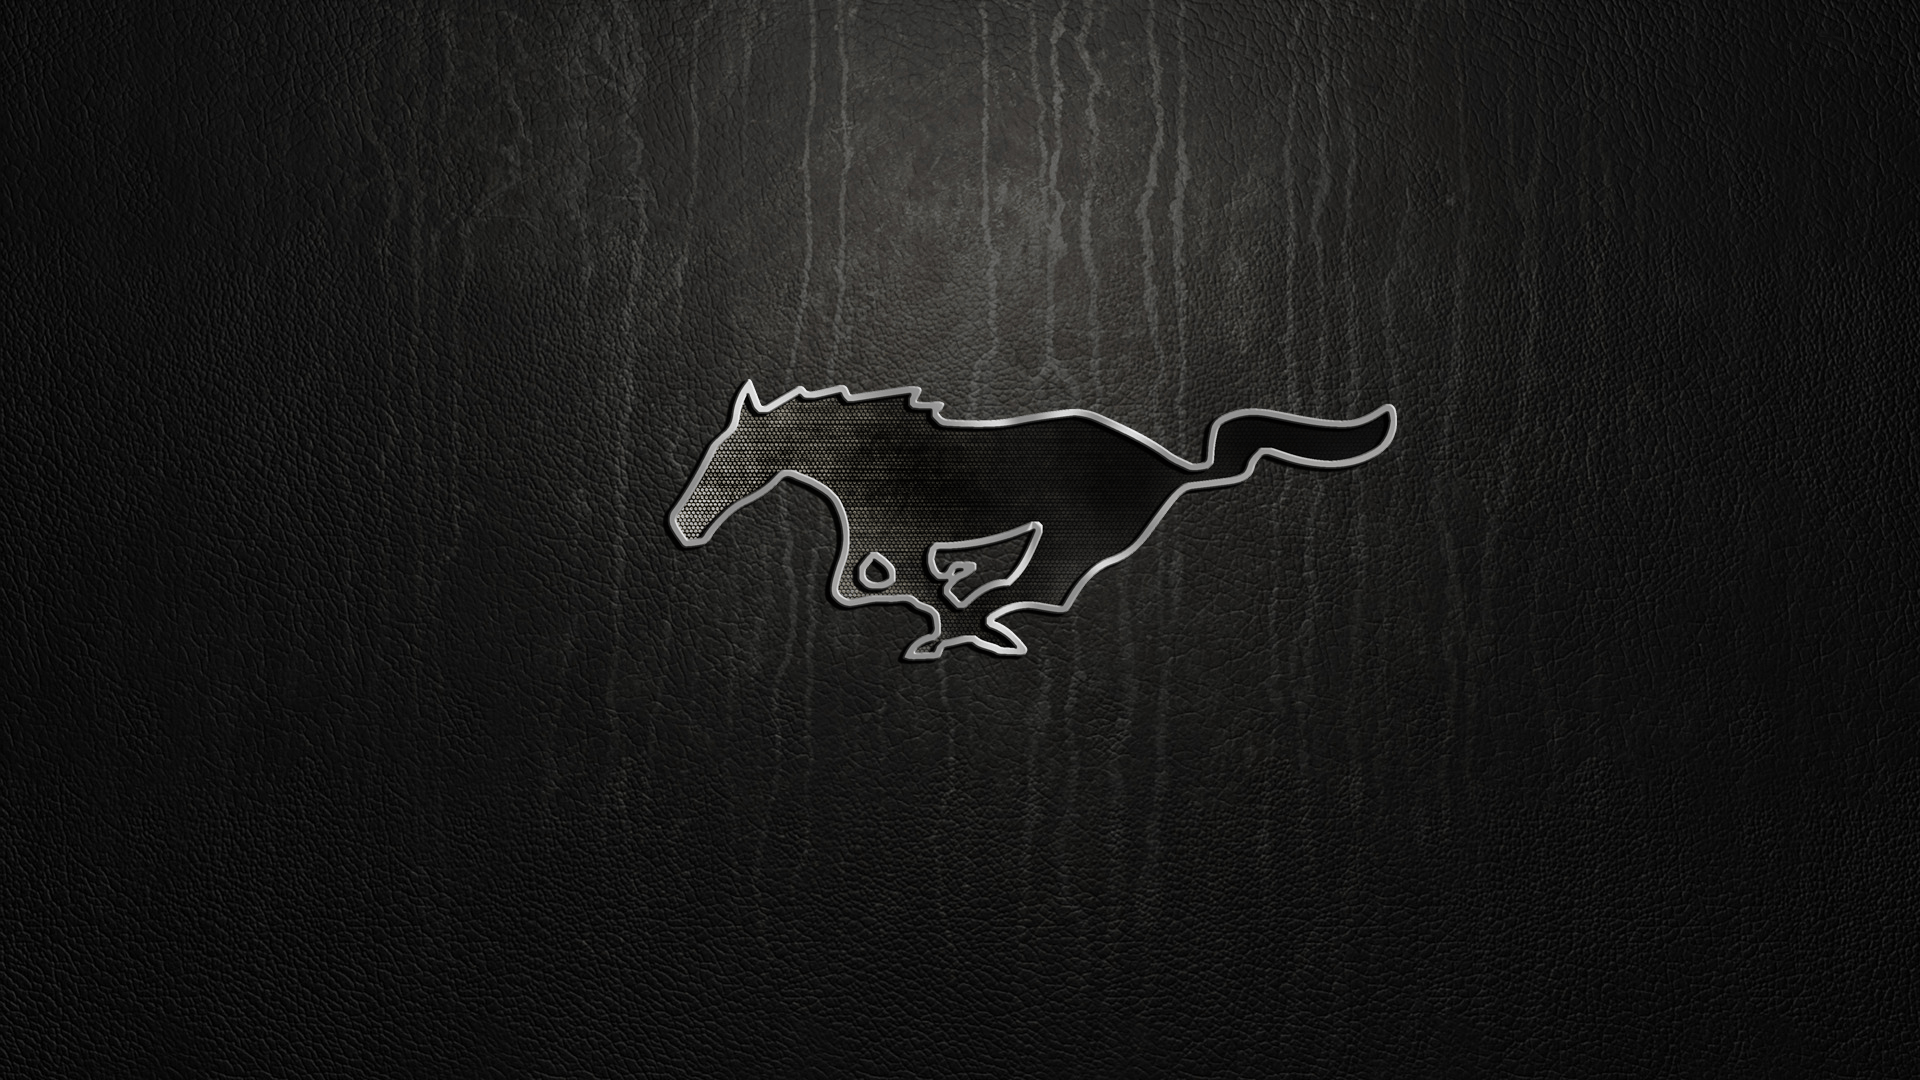 Black Ford Mustang Logo - Mustang Logo Wallpaper For iPhone #gtc. Cars. Mustang, Ford, Ford